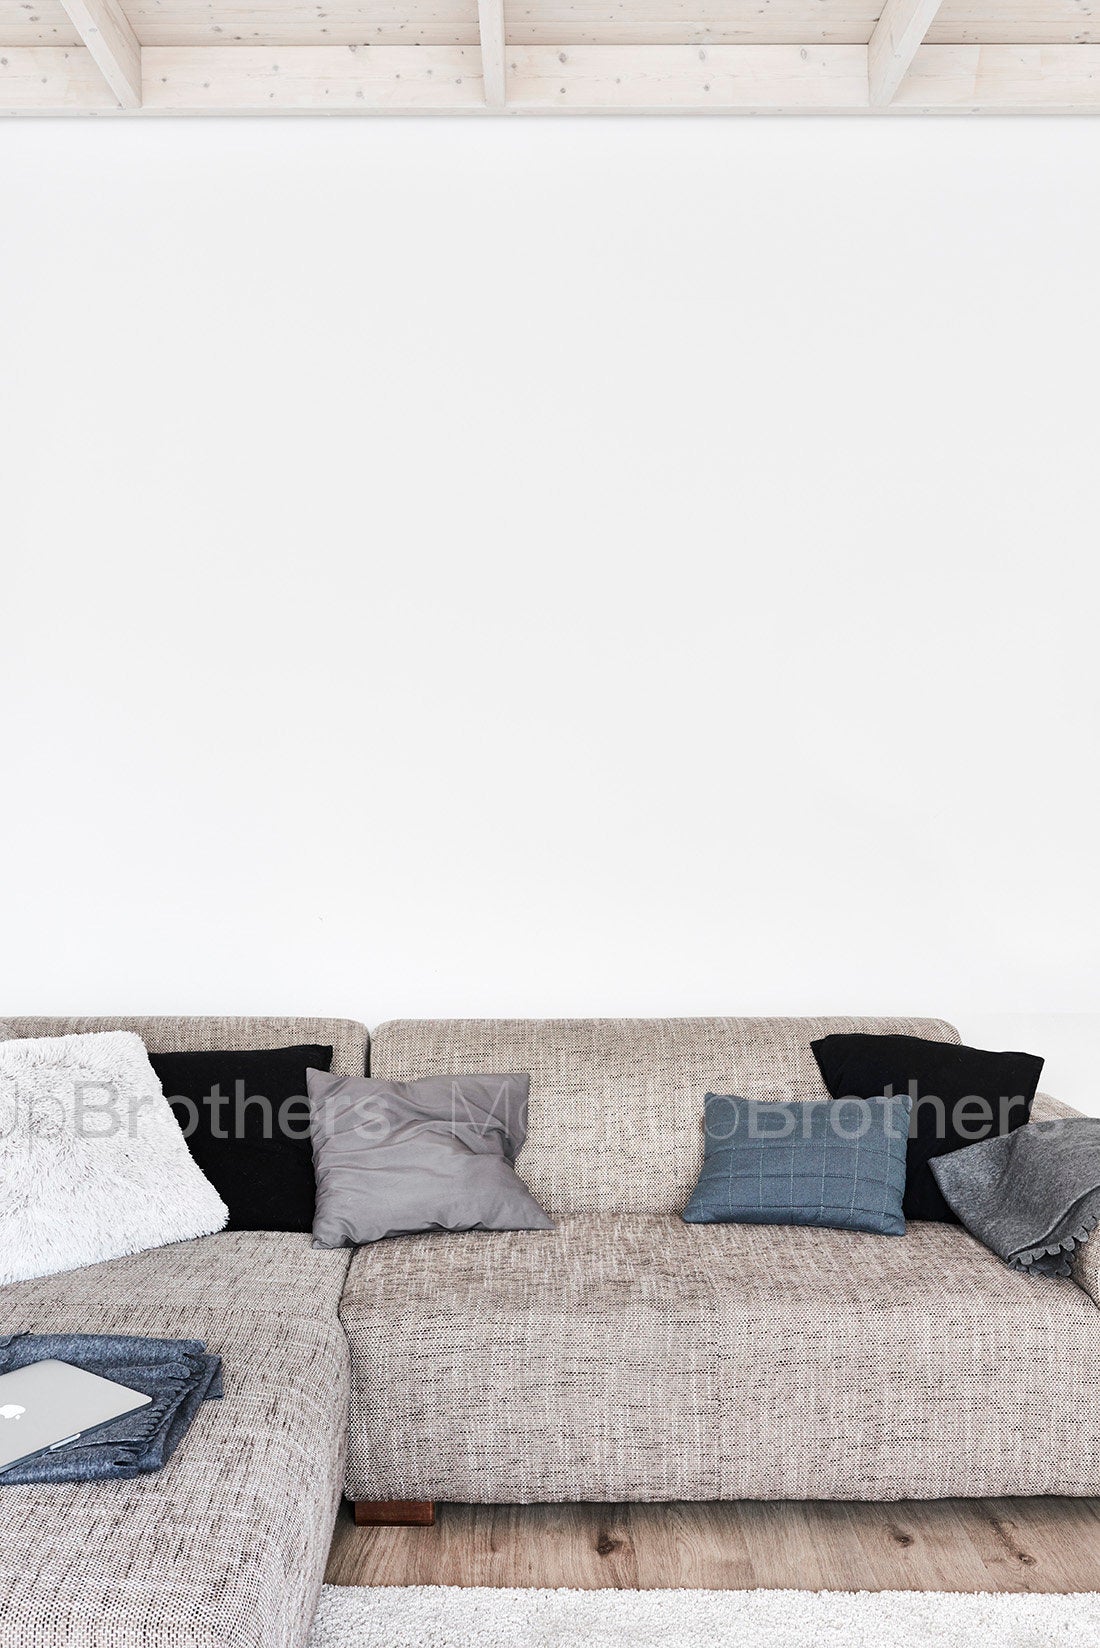 Large wall stock photo by MOckup Brothers